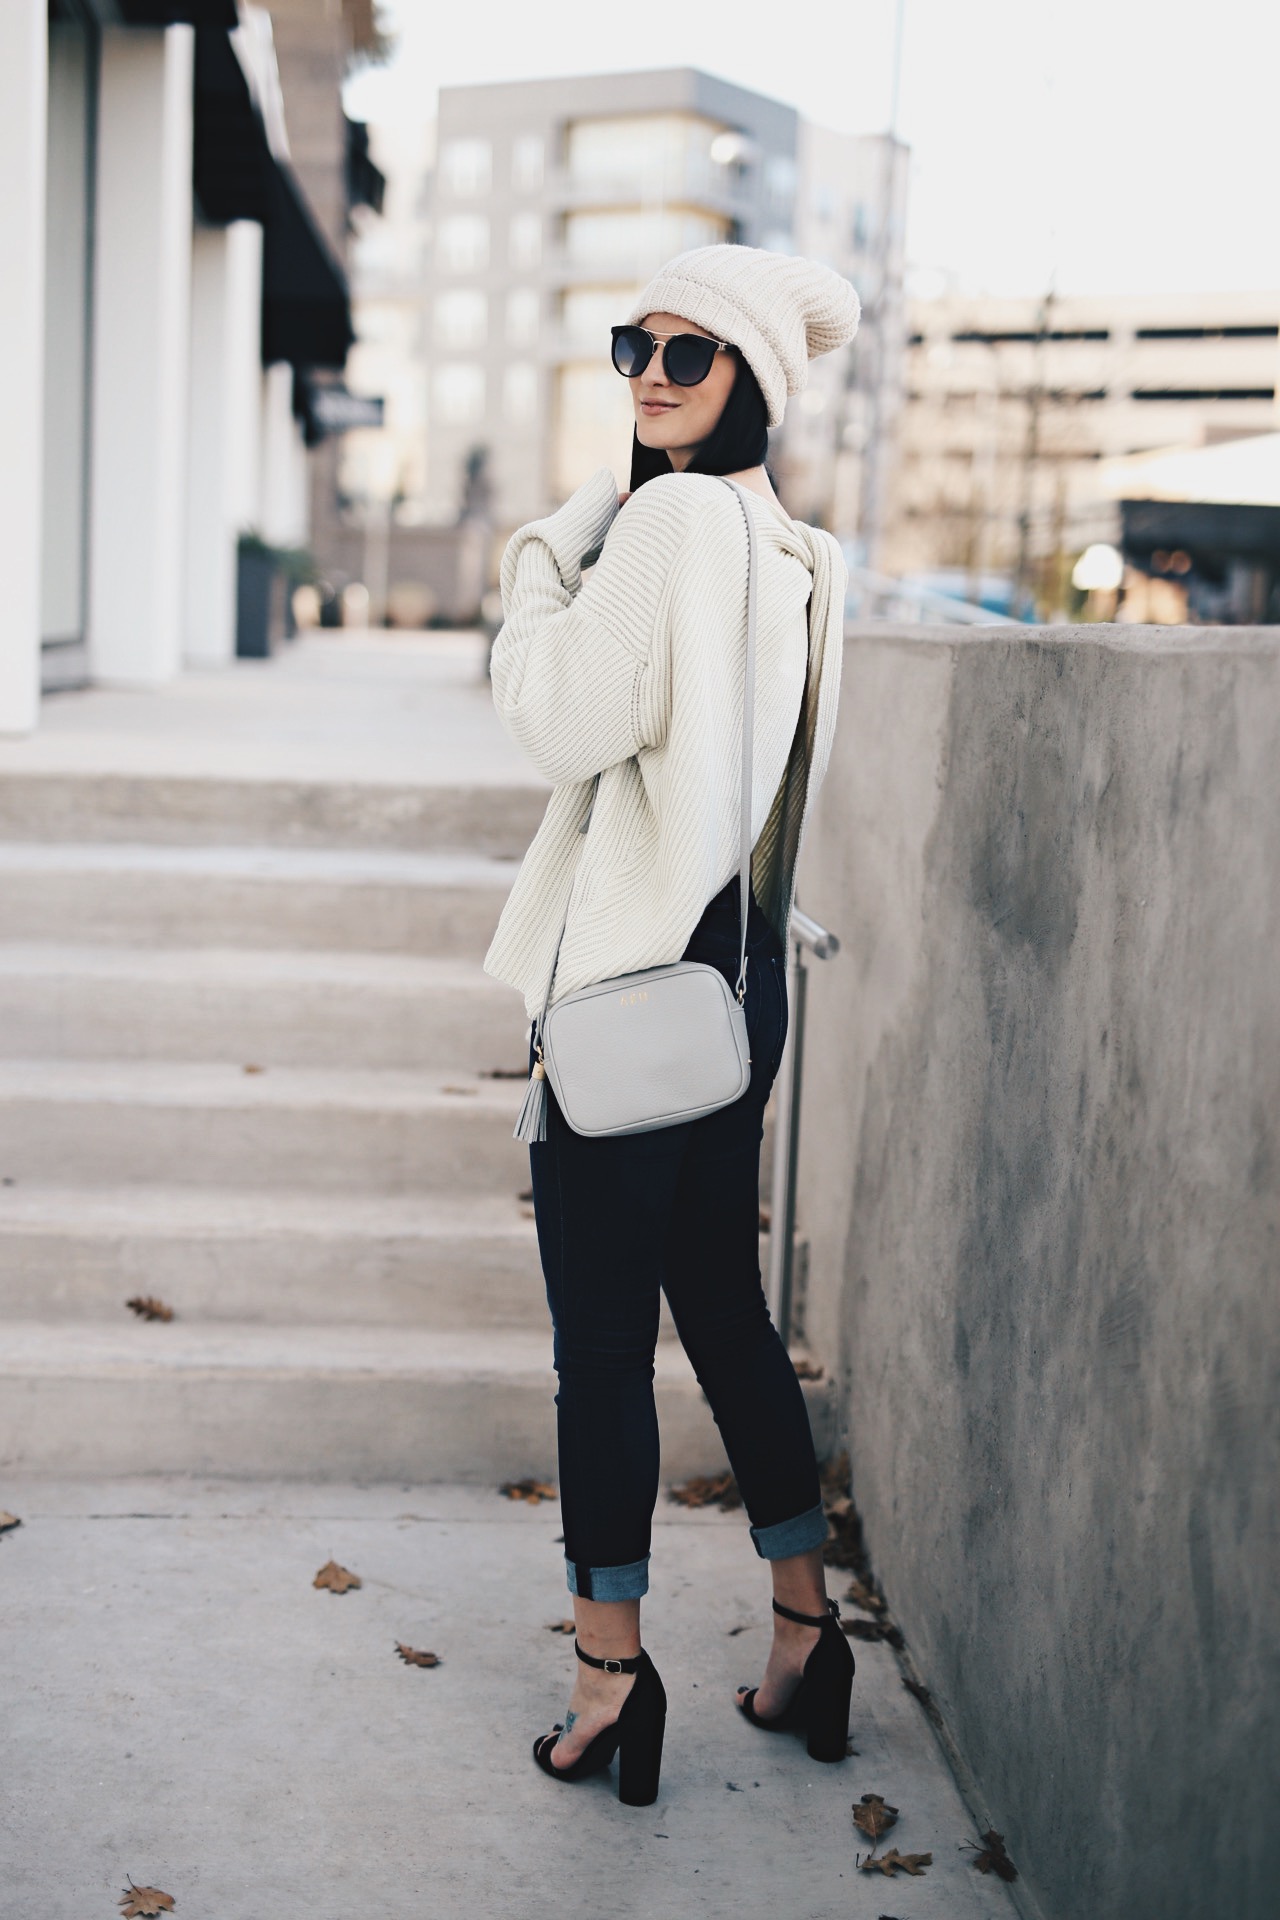 Ashley of DTKAustin is wearing a Chicwish Ivory open back sweater, a Gigi New York cross body bag, Steve Madden heels and Articles of Society Denim in Austin.